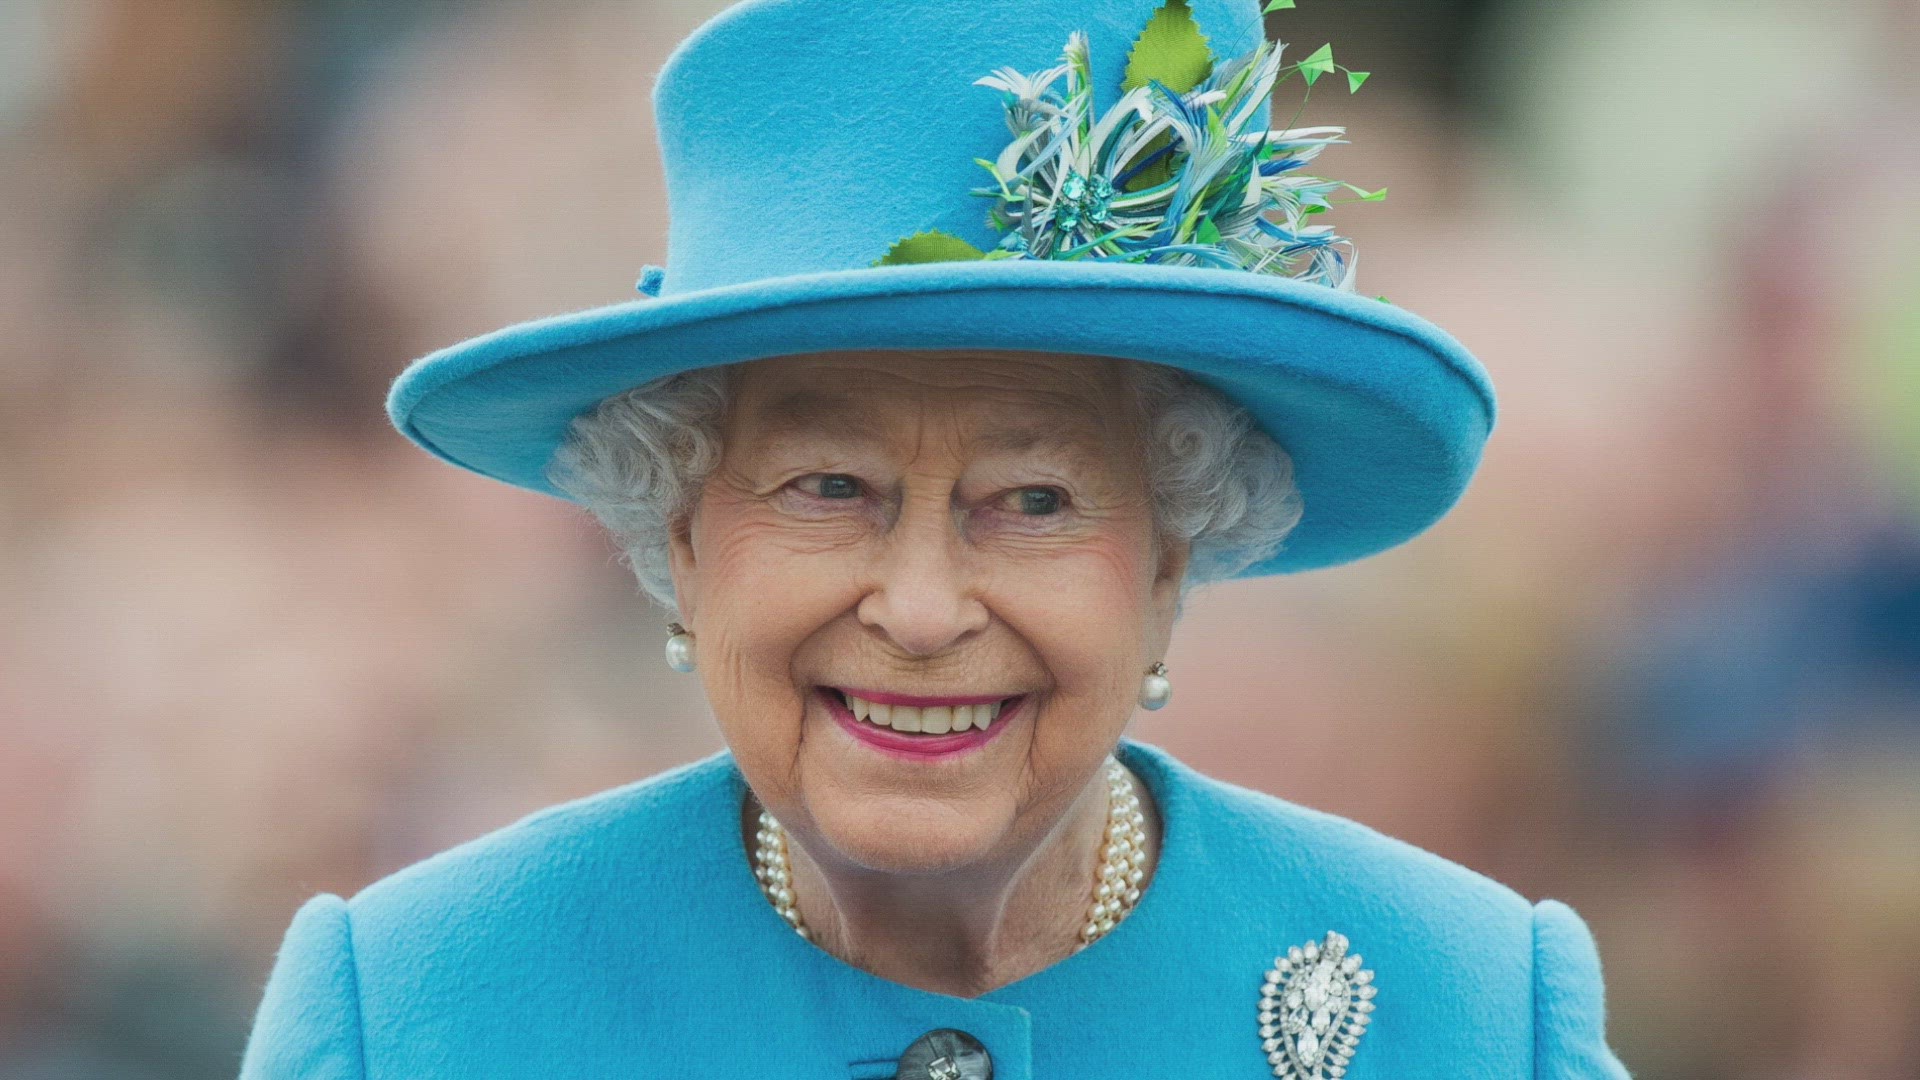 She's one of the most famous people on Earth, Veuer's Justin Kircher has some facts you probably didn't know about the Queen of England.